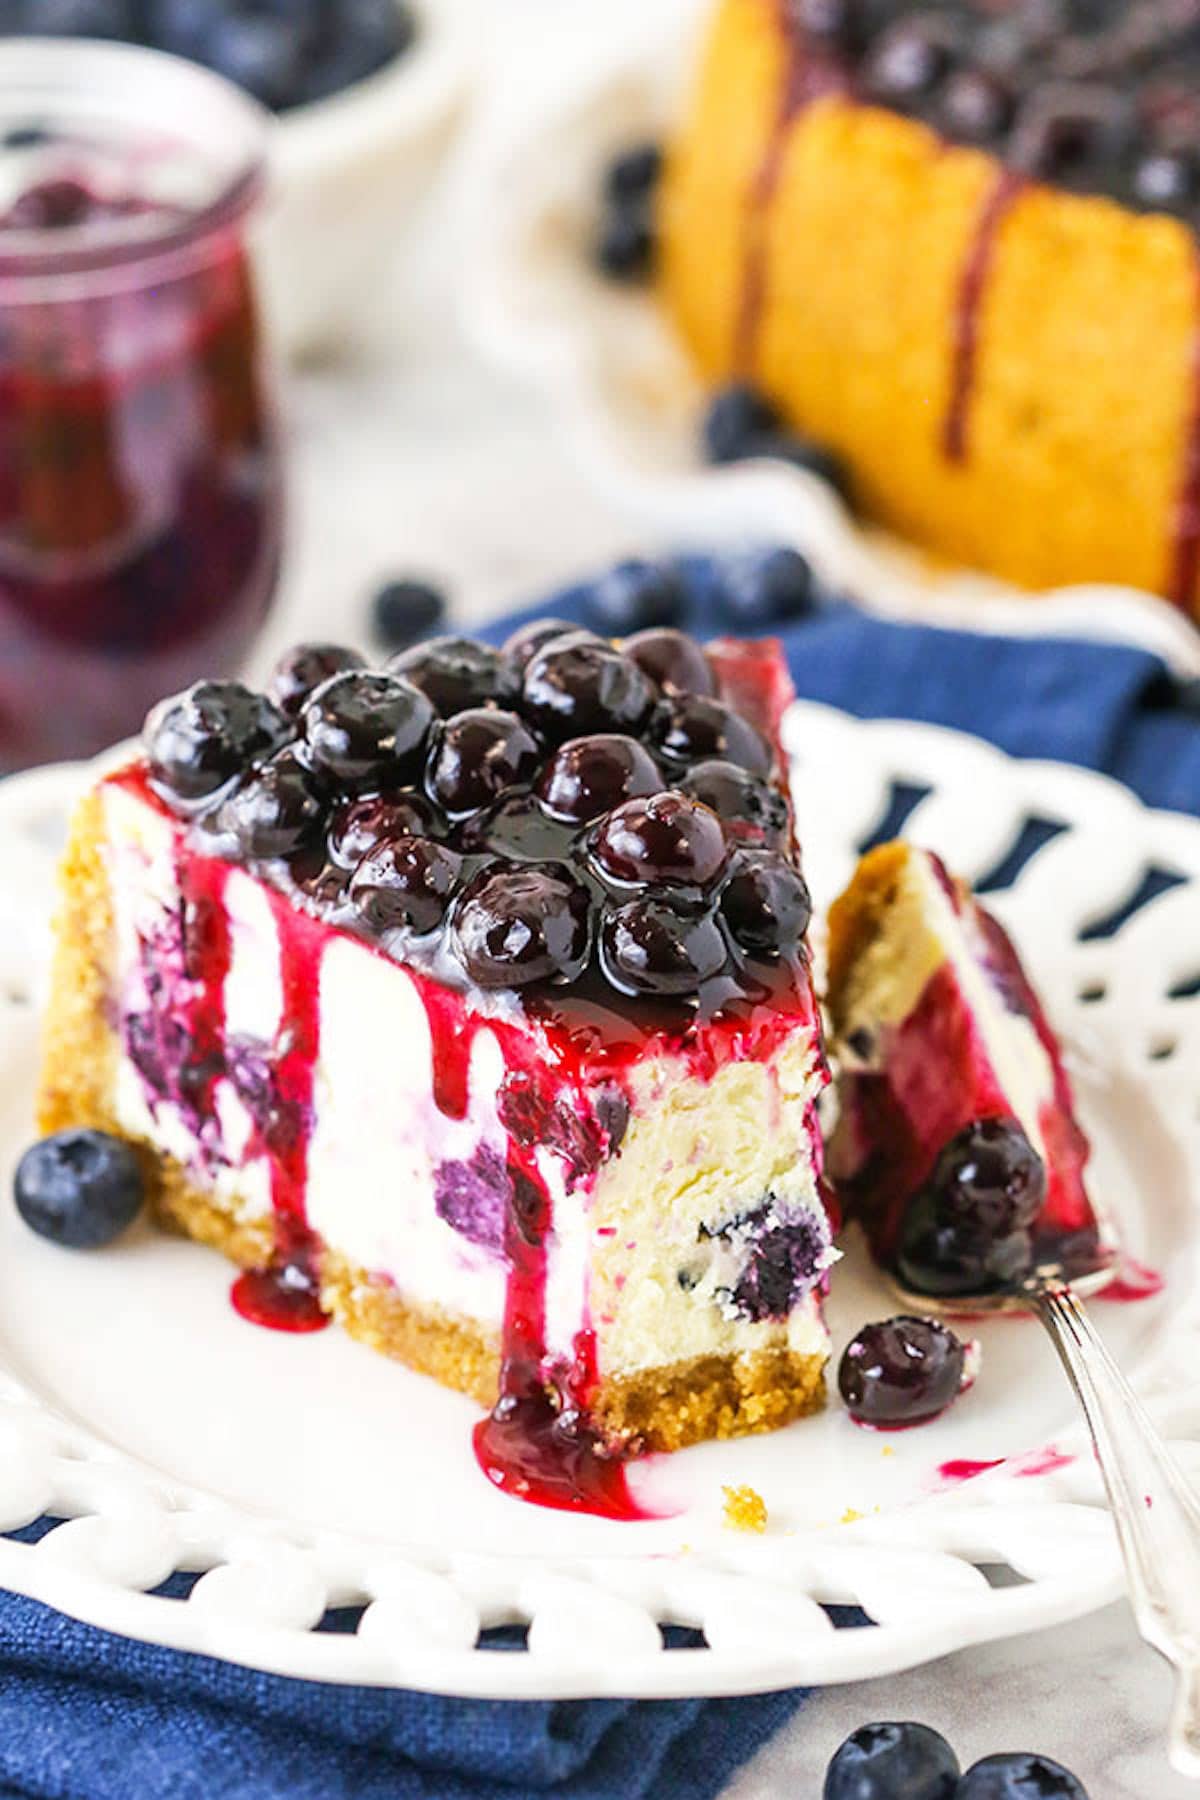 A Slice of Blueberry Cheesecake on a Plate with One Bite on a Fork